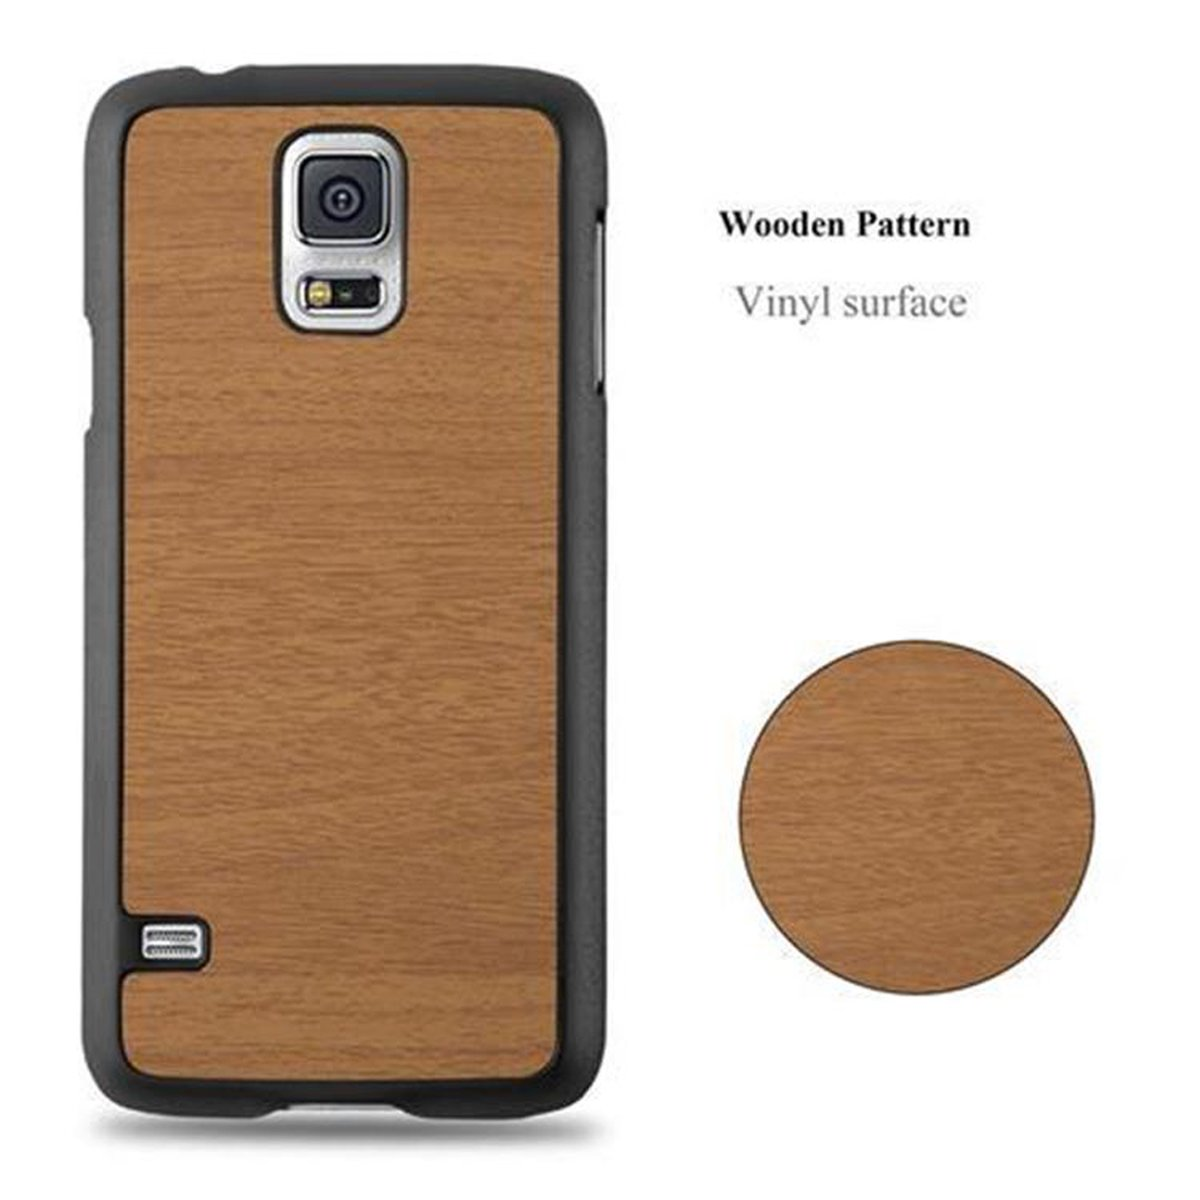 Galaxy Samsung, S5 WOODY Backcover, Hard Woody / NEO, Hülle Style, BRAUN CADORABO Case S5